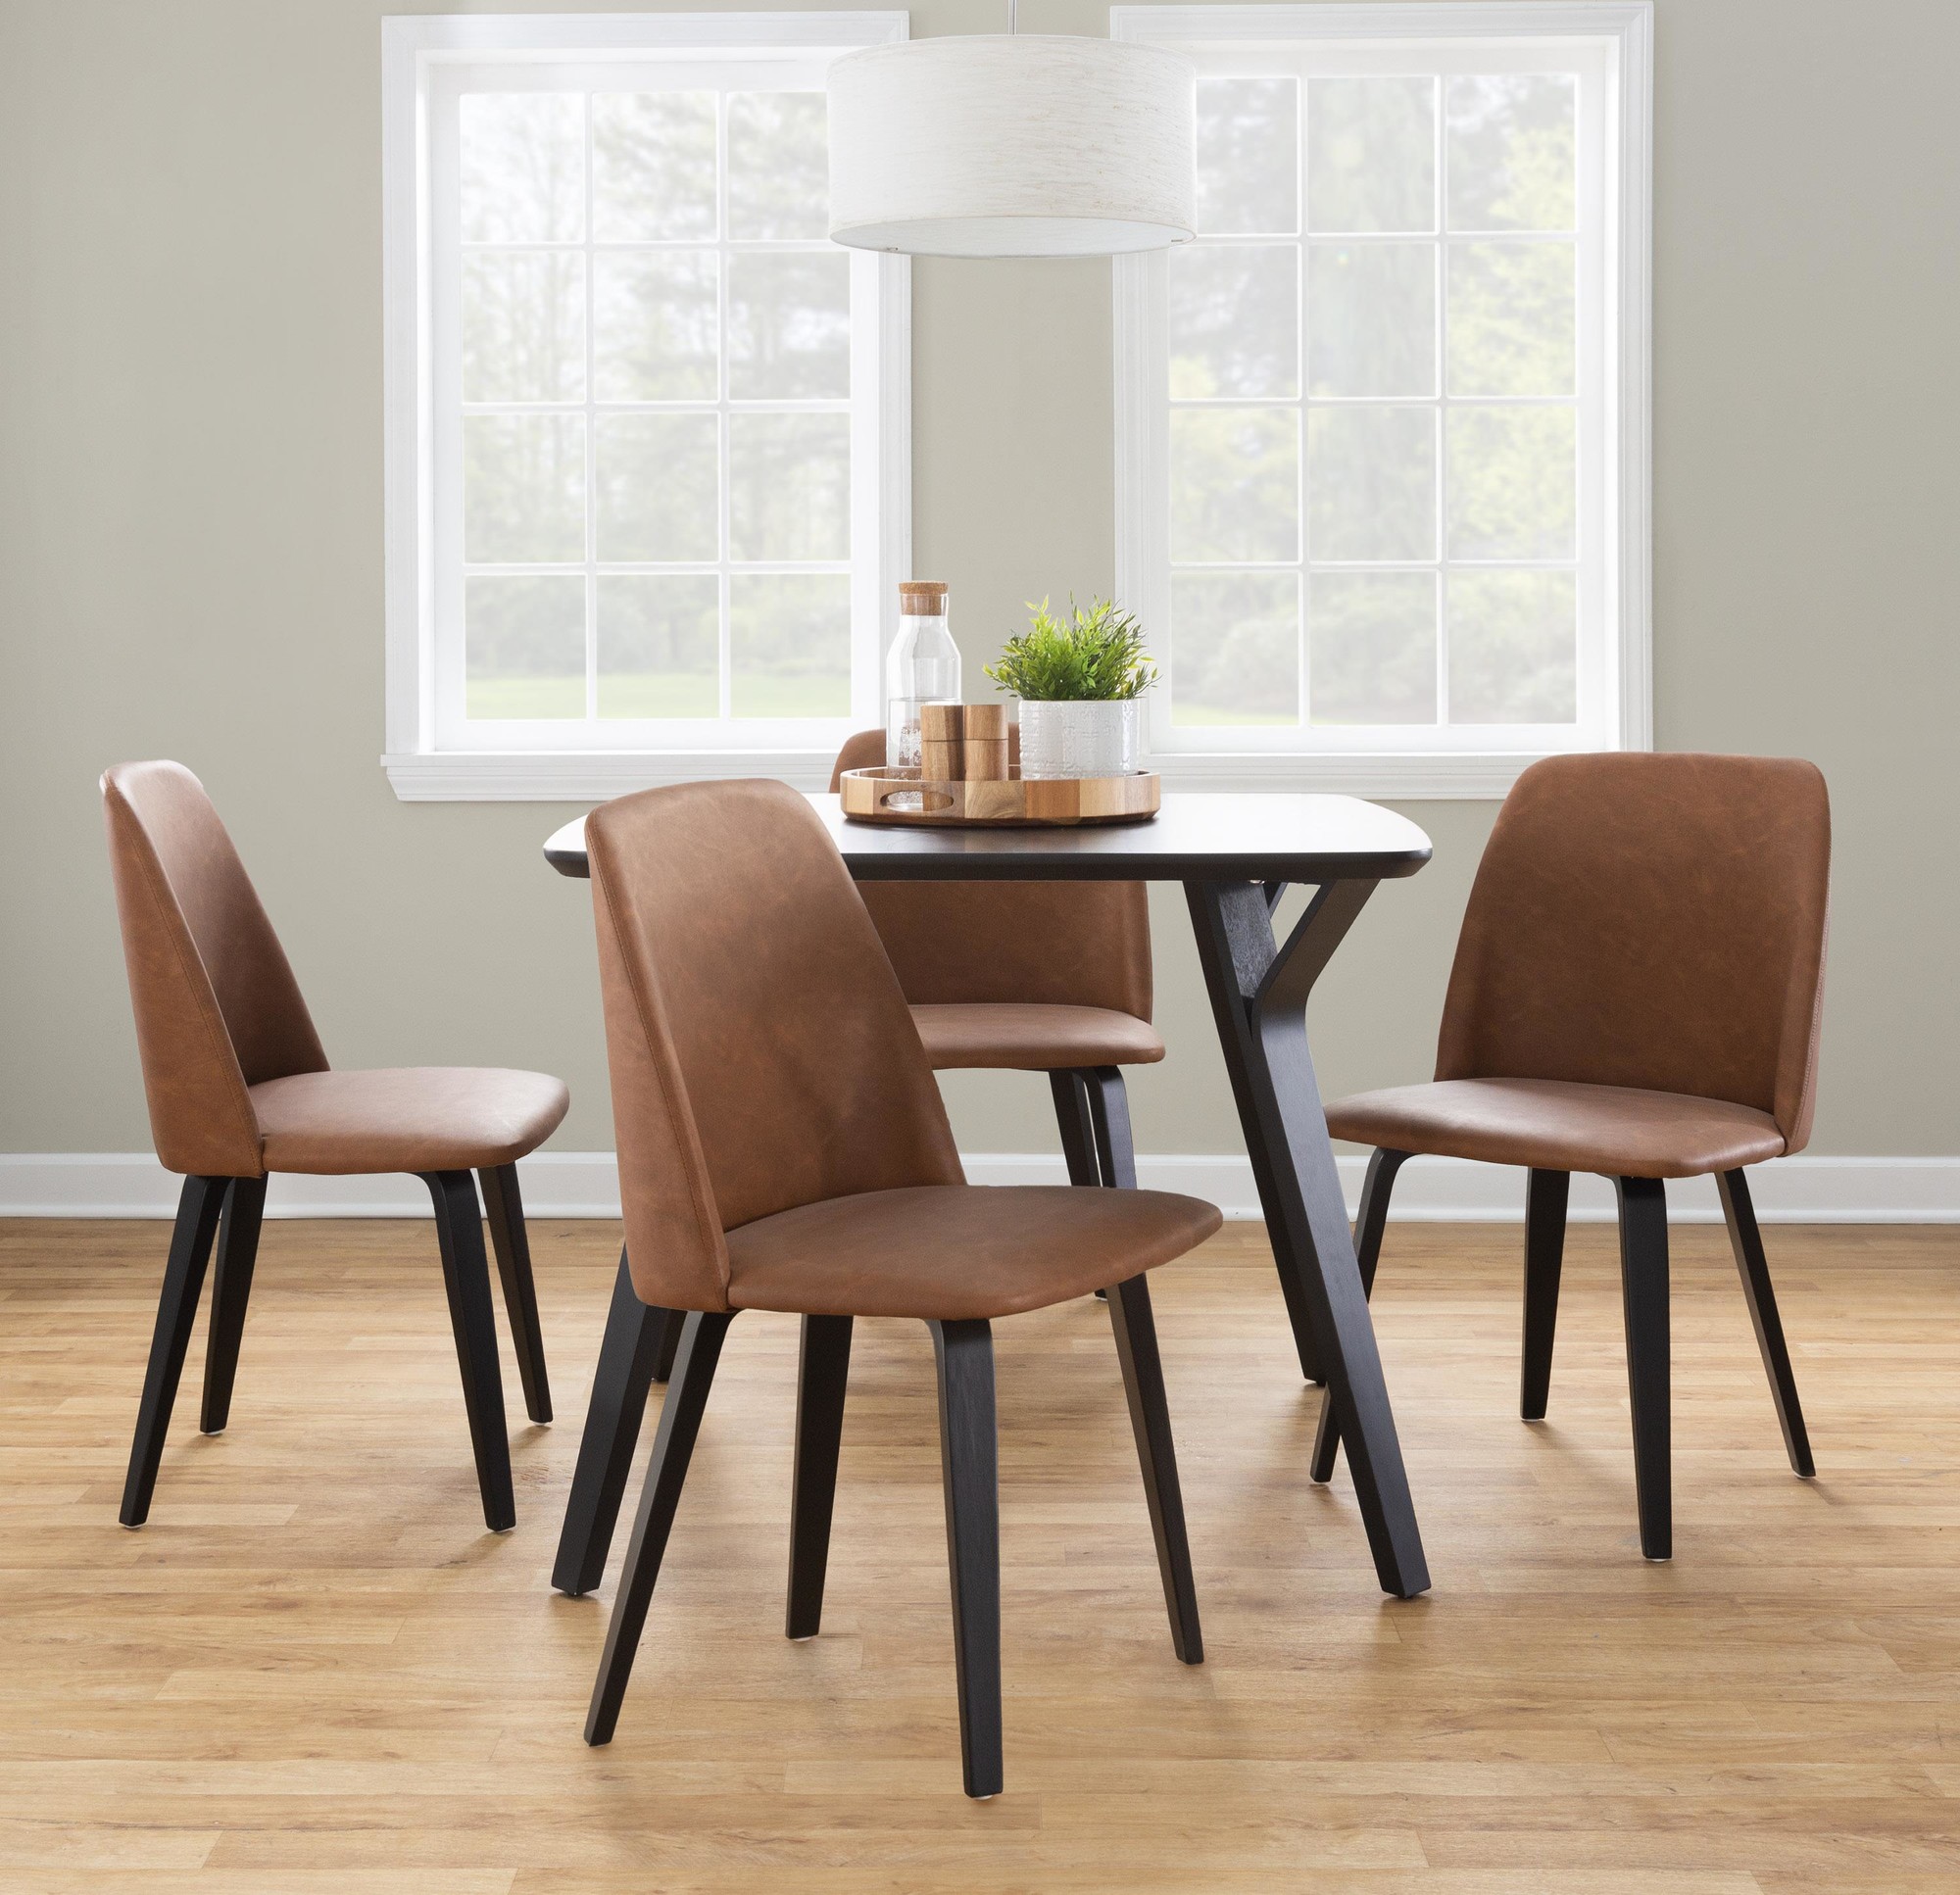 Toriano Dining Chair - Set Of 2